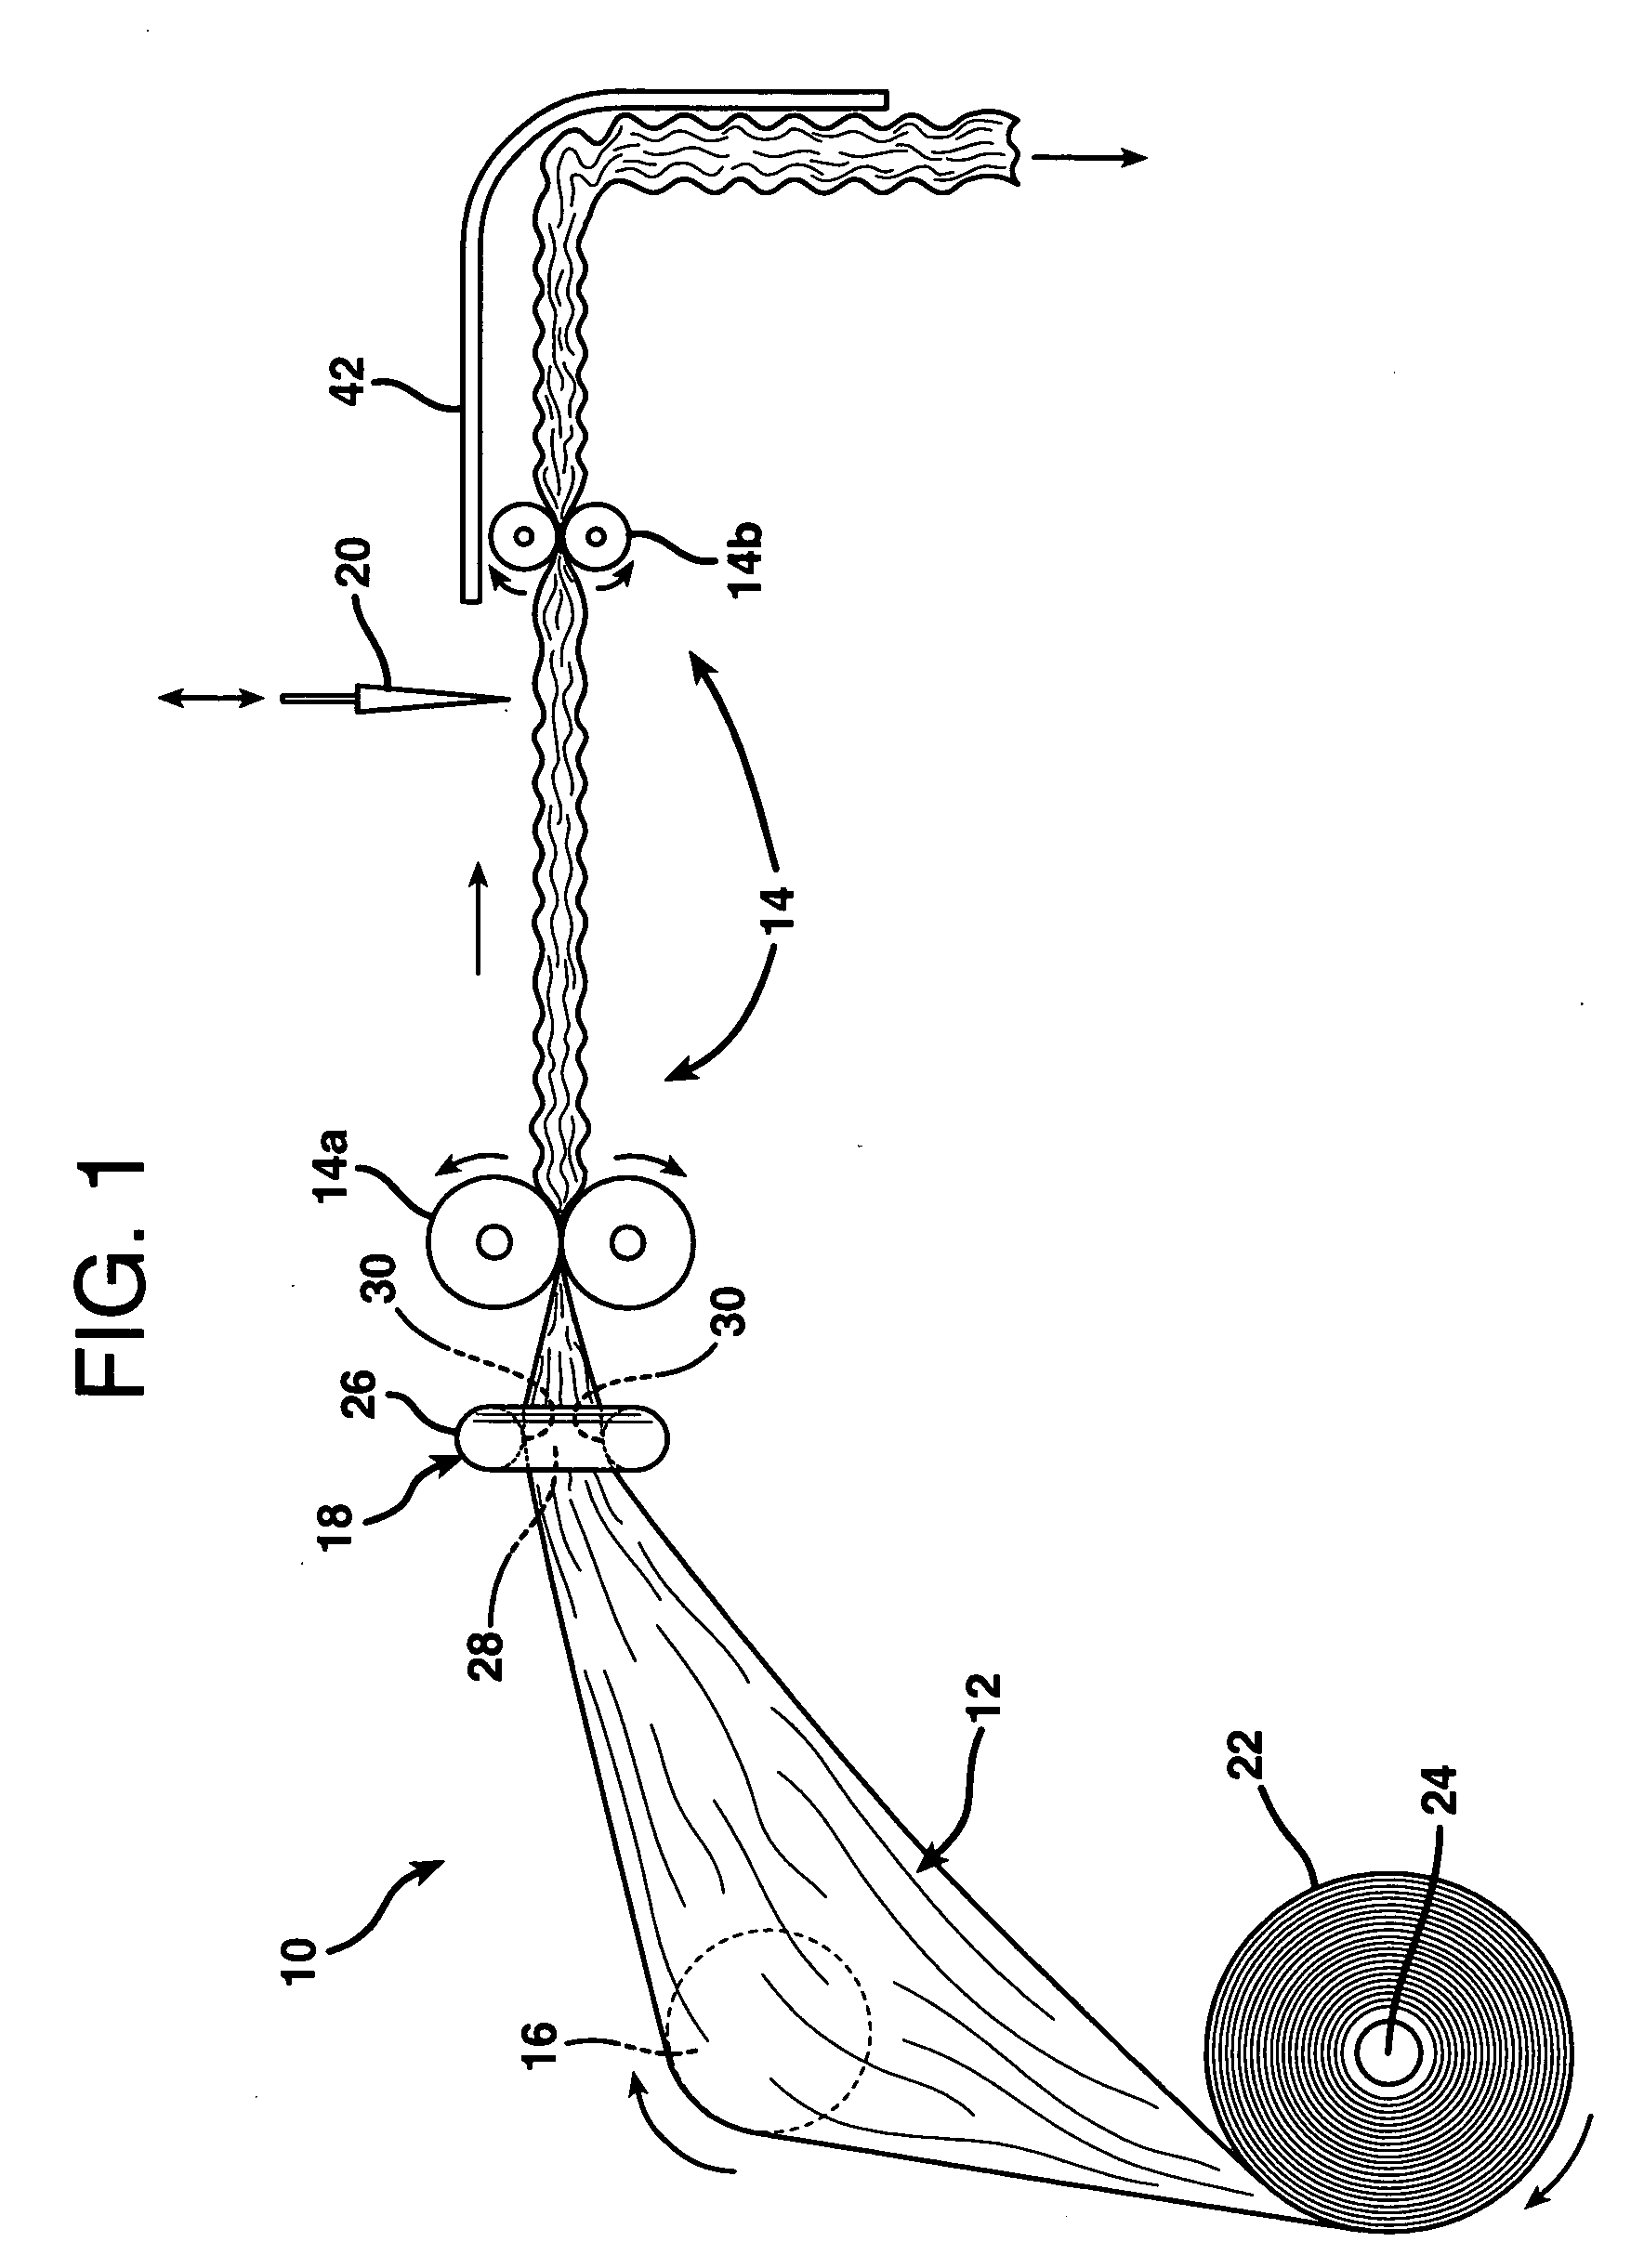 Machine and method for converting a web of material into dunnage